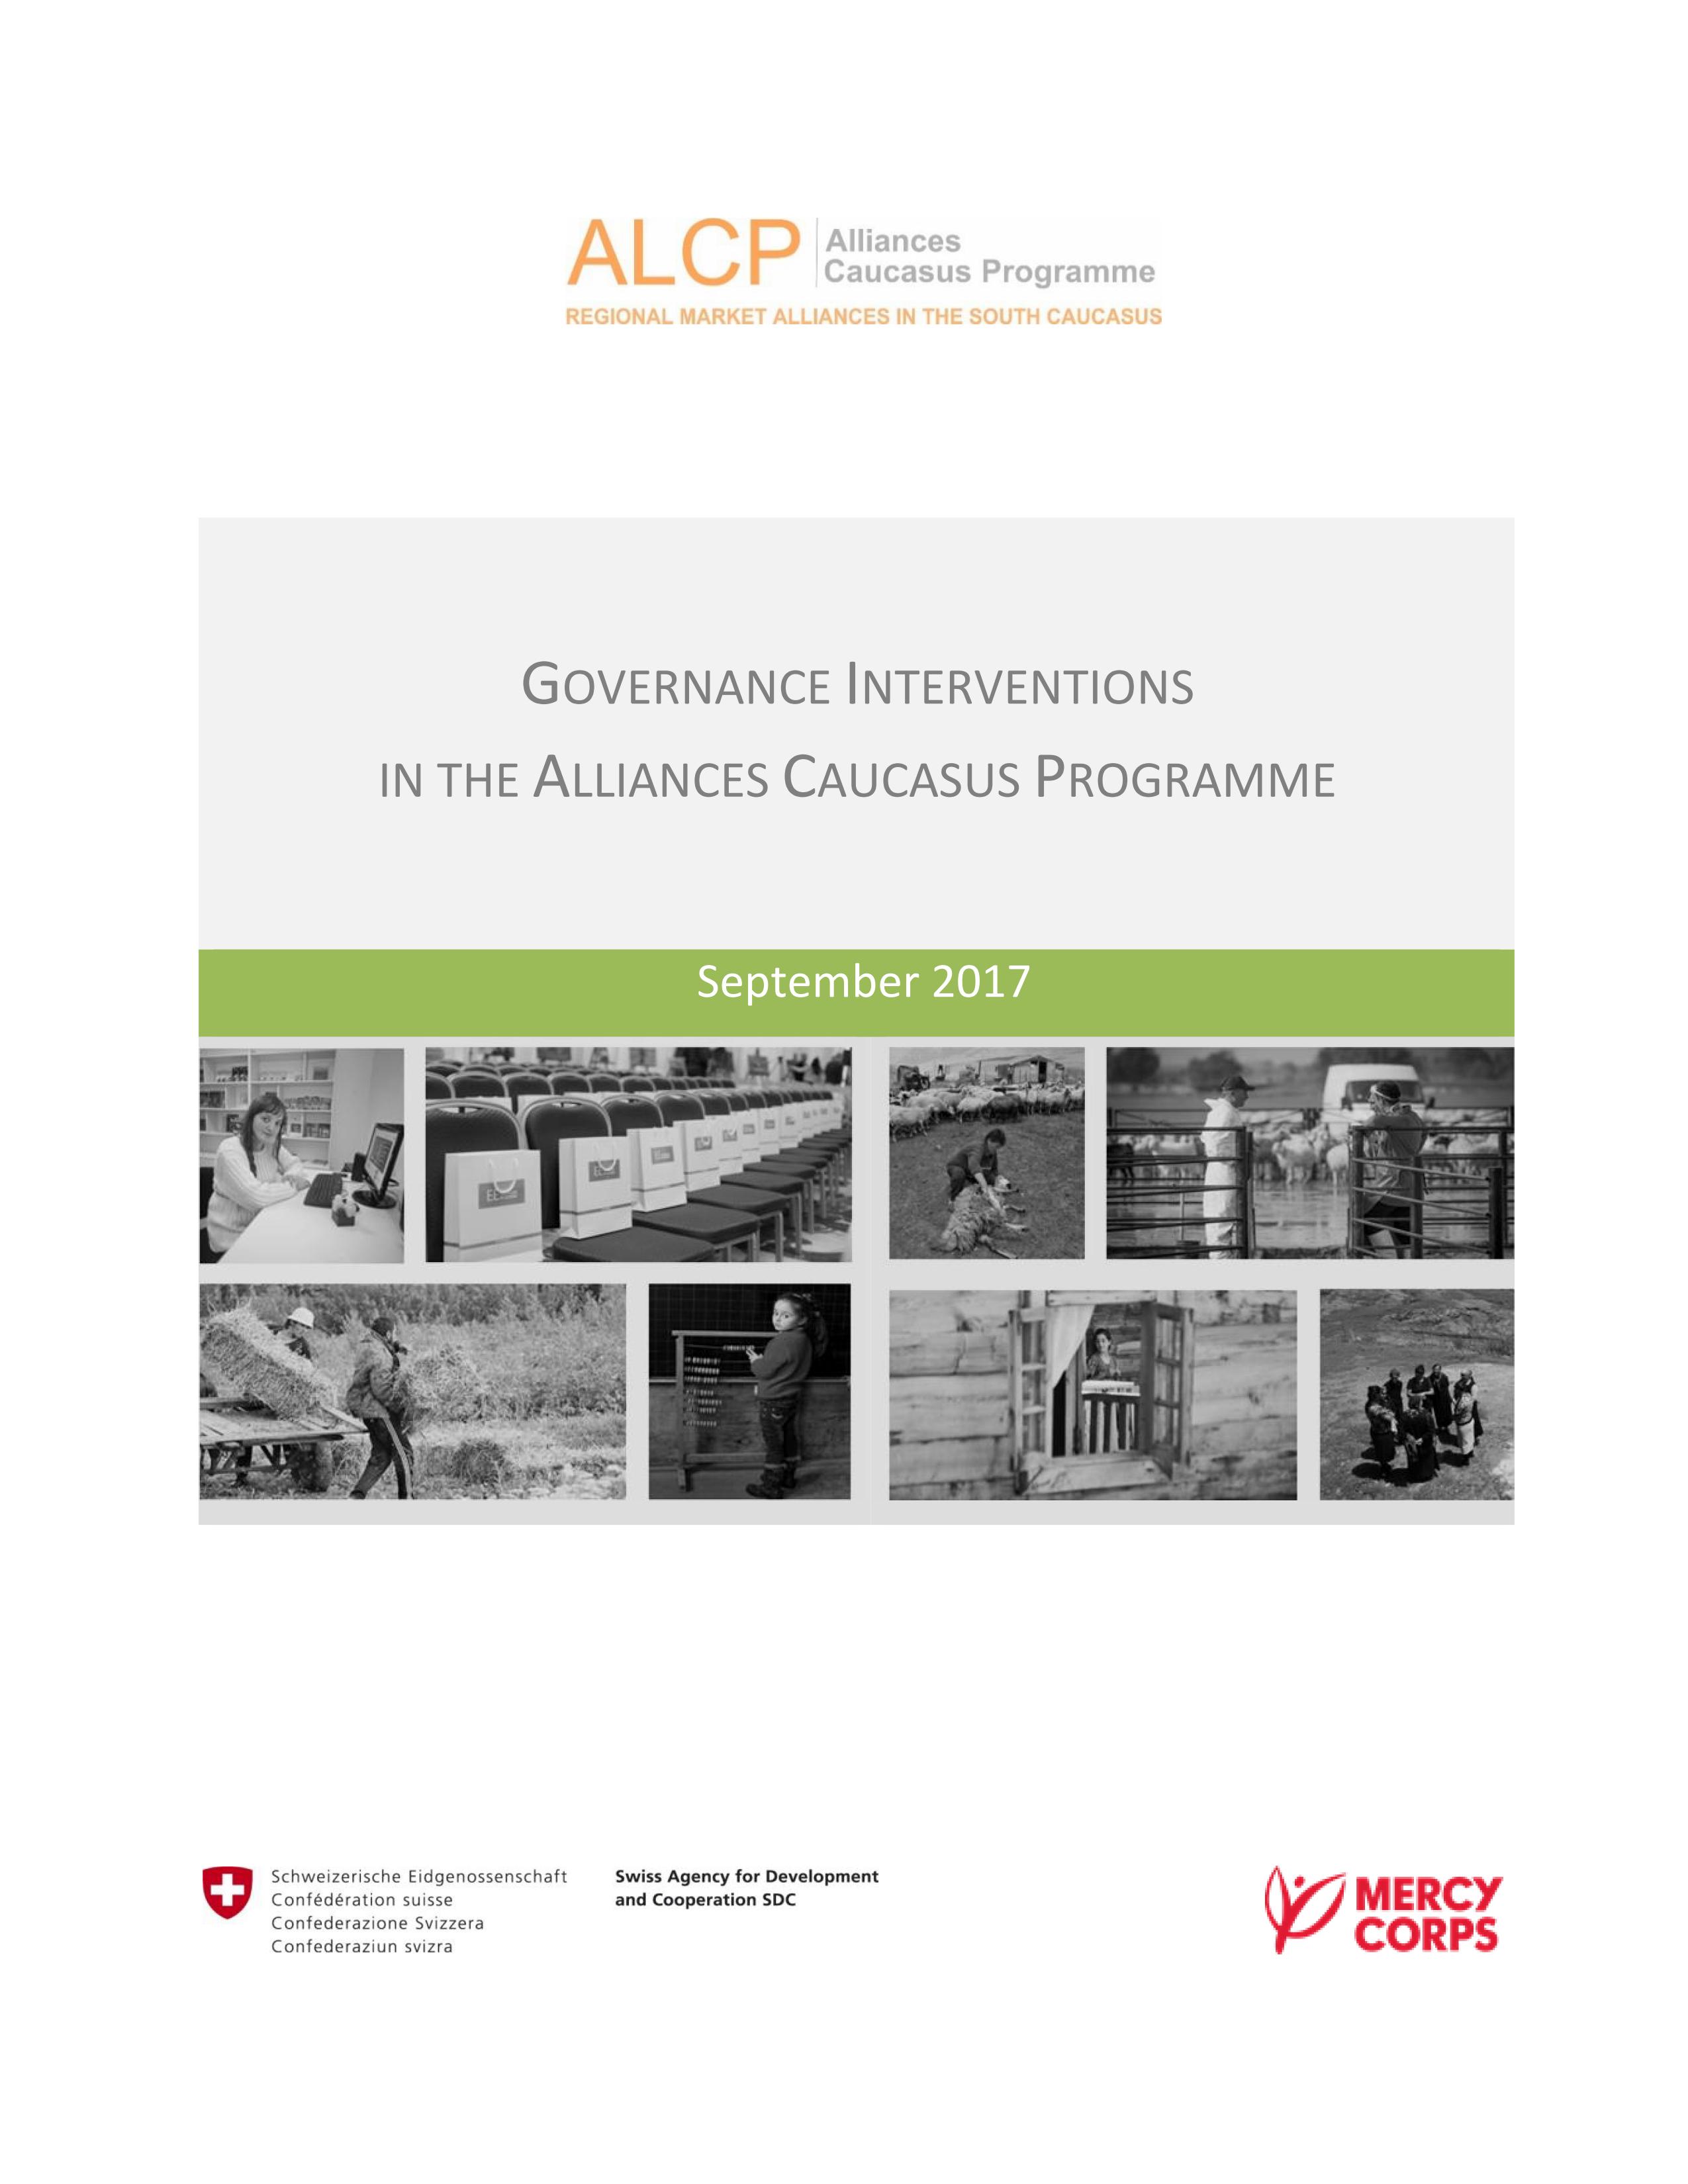 Governance Interventions in the ALCP 2017